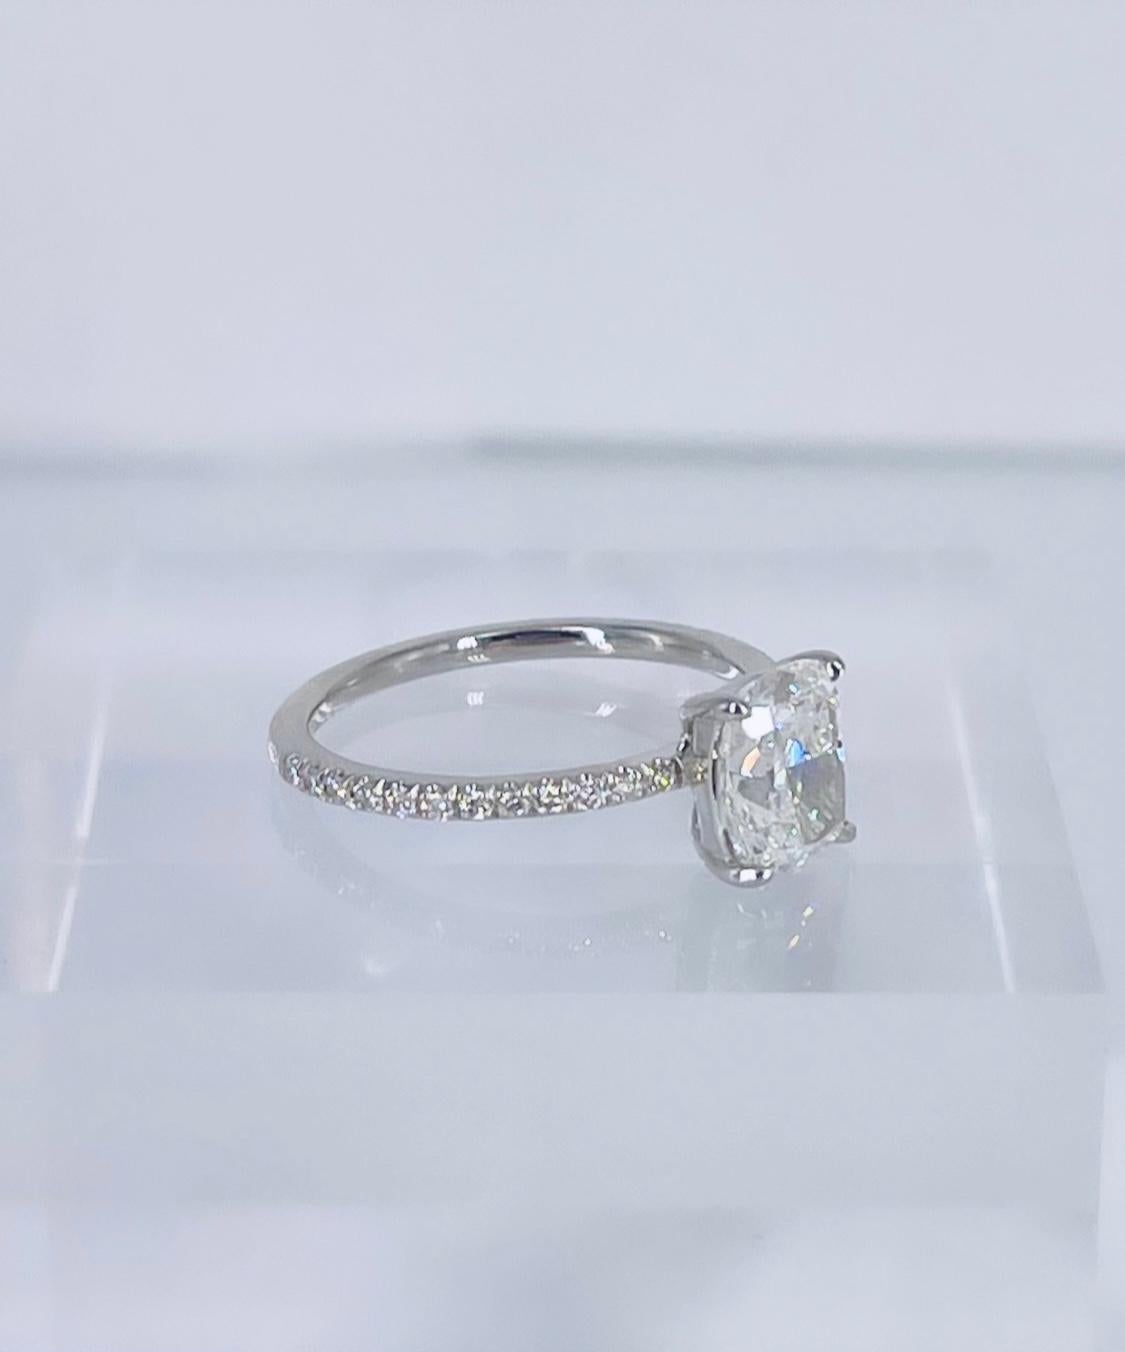 Sparkling and delicate, this cushion pave solitaire engagement ring is a modern classic! This ring features a 1.51 carat elongated cushion certified by GIA to be H color and SI1 clarity. The diamond is white and has a lively brilliance. The